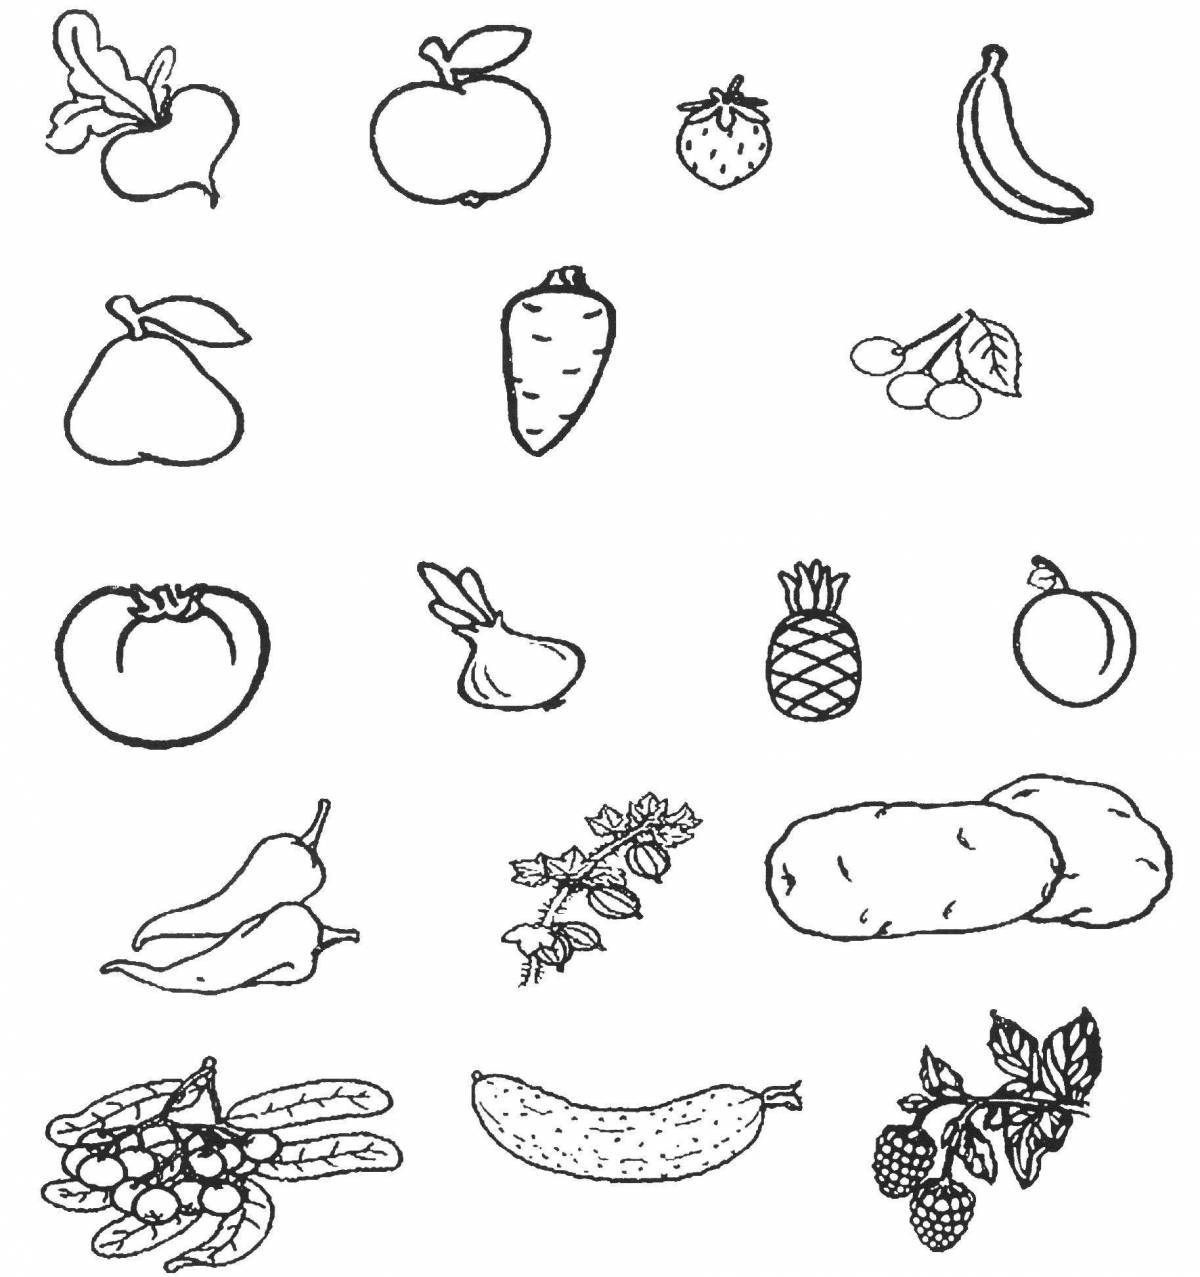 Colorful and vibrant fruit coloring page